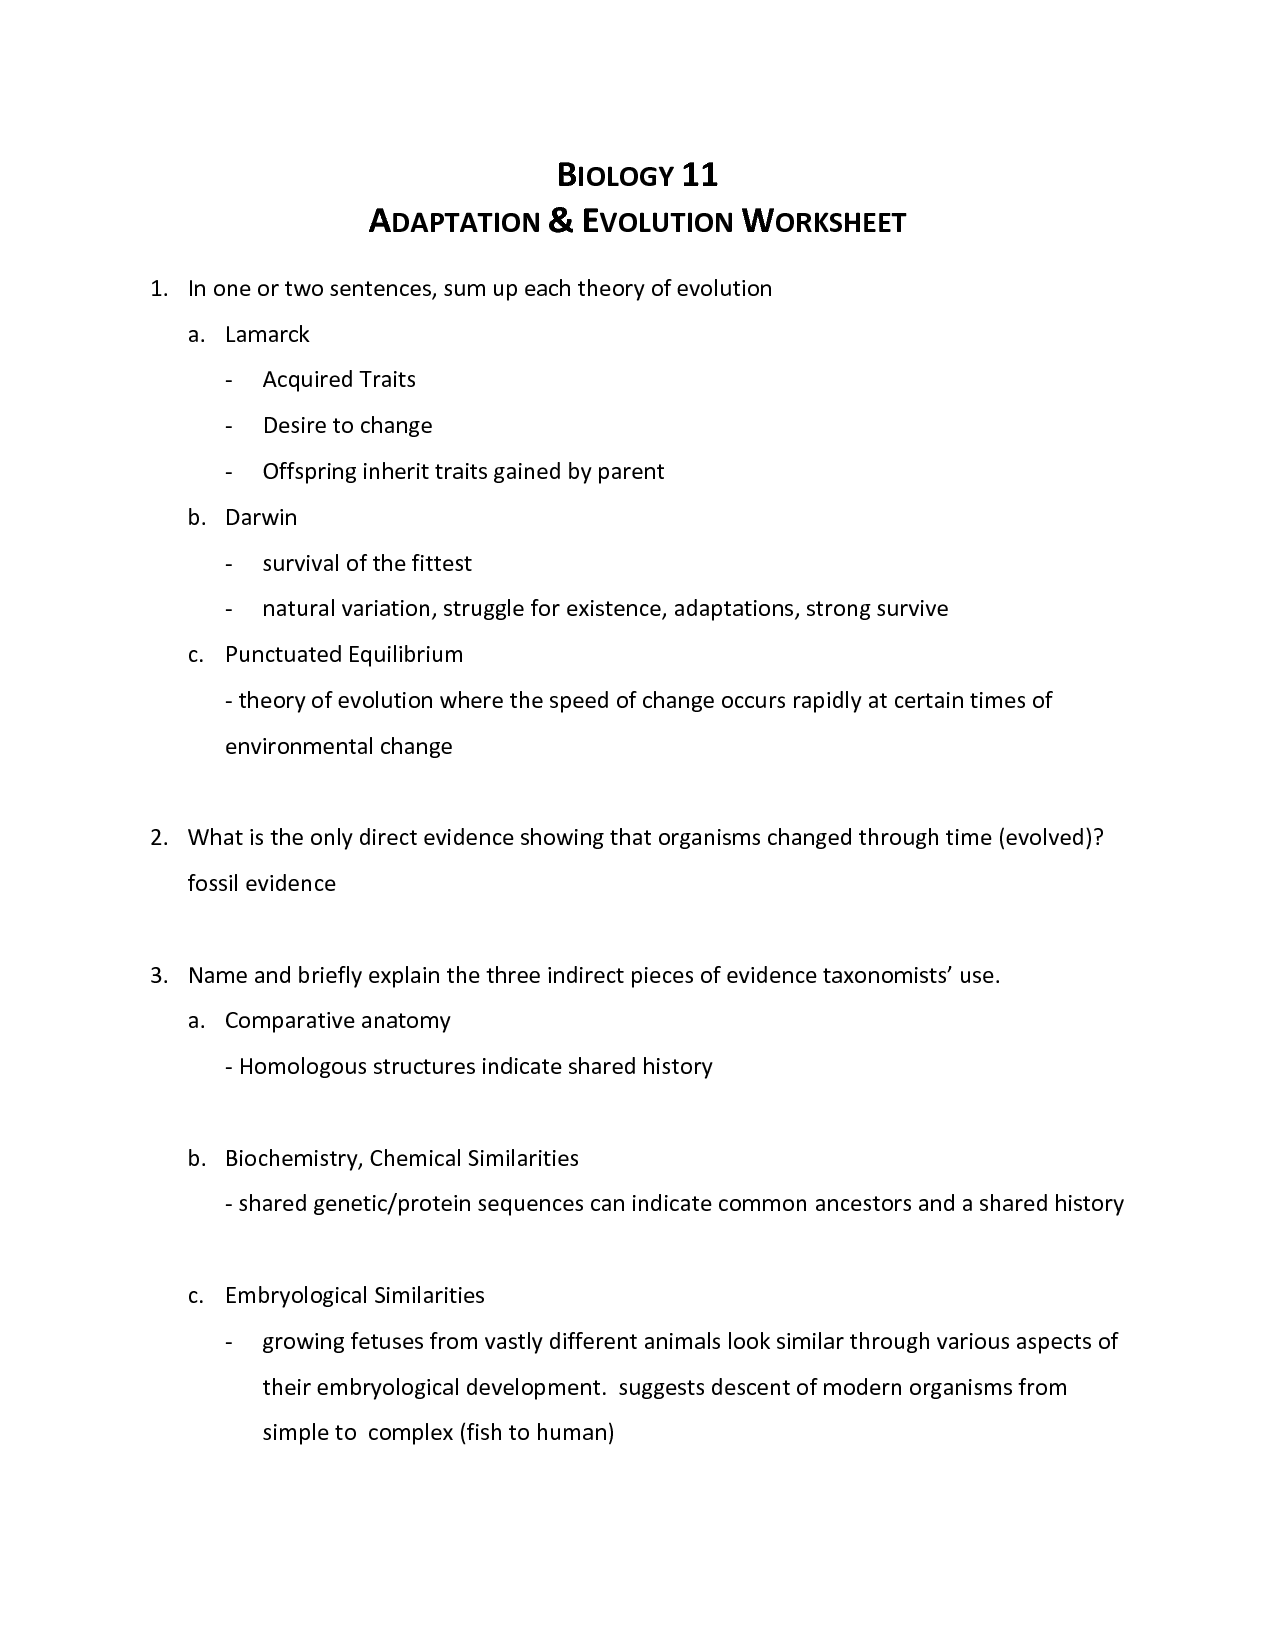 16-best-images-of-evidence-of-evolution-worksheet-answers-evidence-of